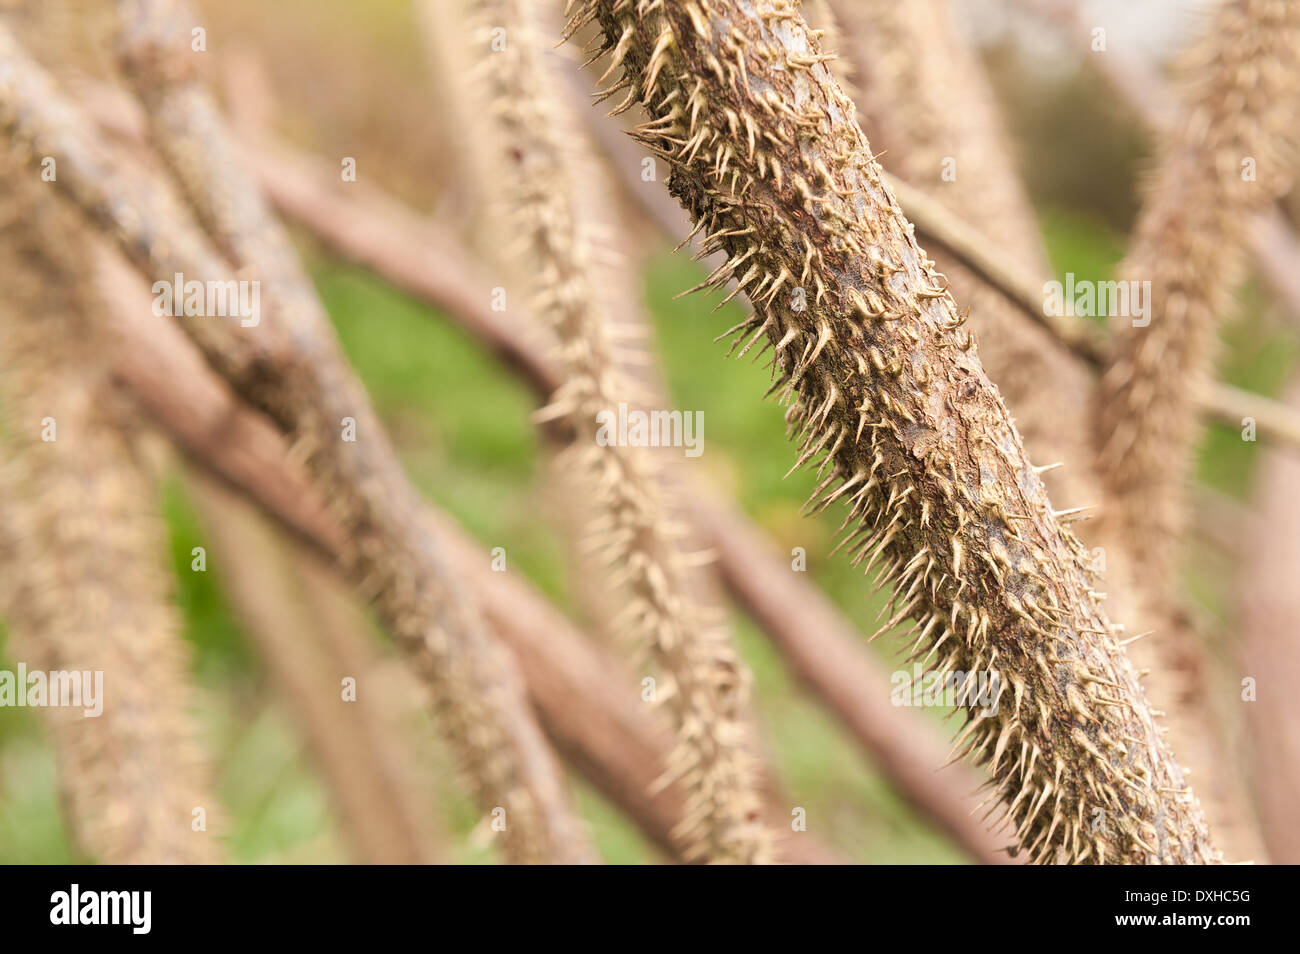 Detail of masses of small prickly sharp thorns and spines on stems of wild roses like a file rasp, Rosa rugosa, painful like sharp needles Stock Photo